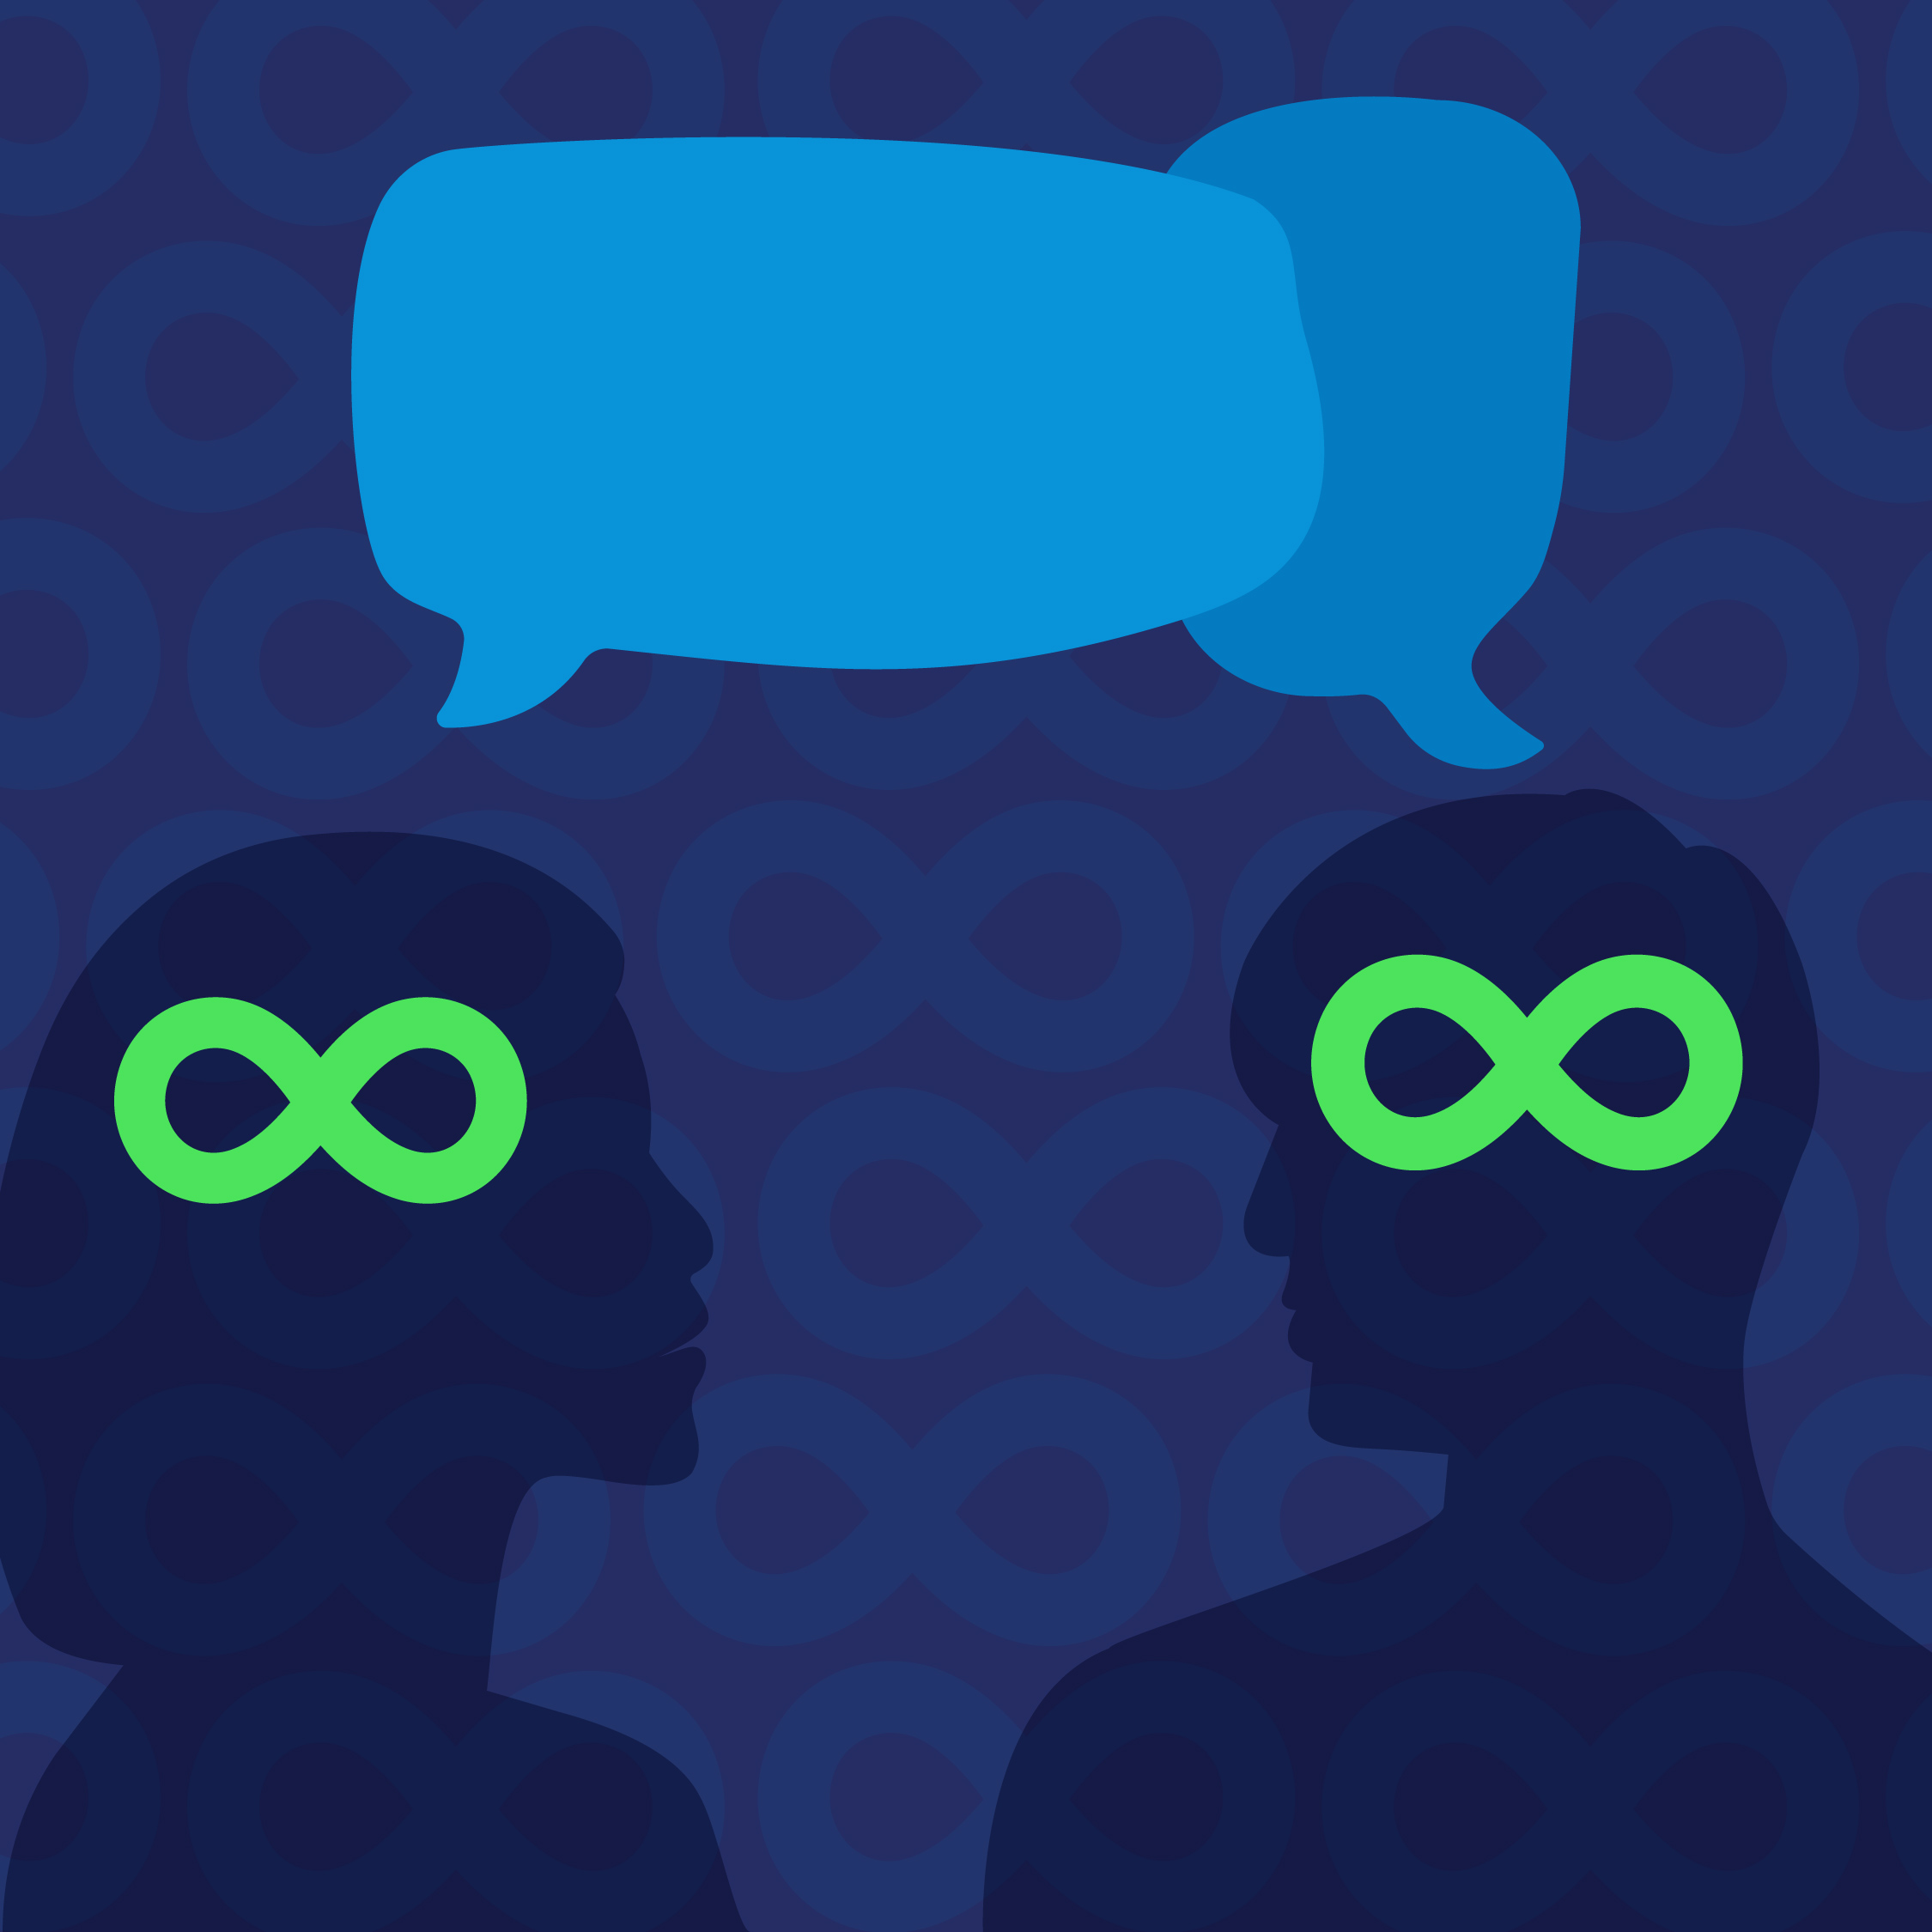 Two silhouettes with green infinity symbol facing each other with blue speech bubbles above them overlapping. In the background there is an infinity symbol pattern to represent neurodiversity.